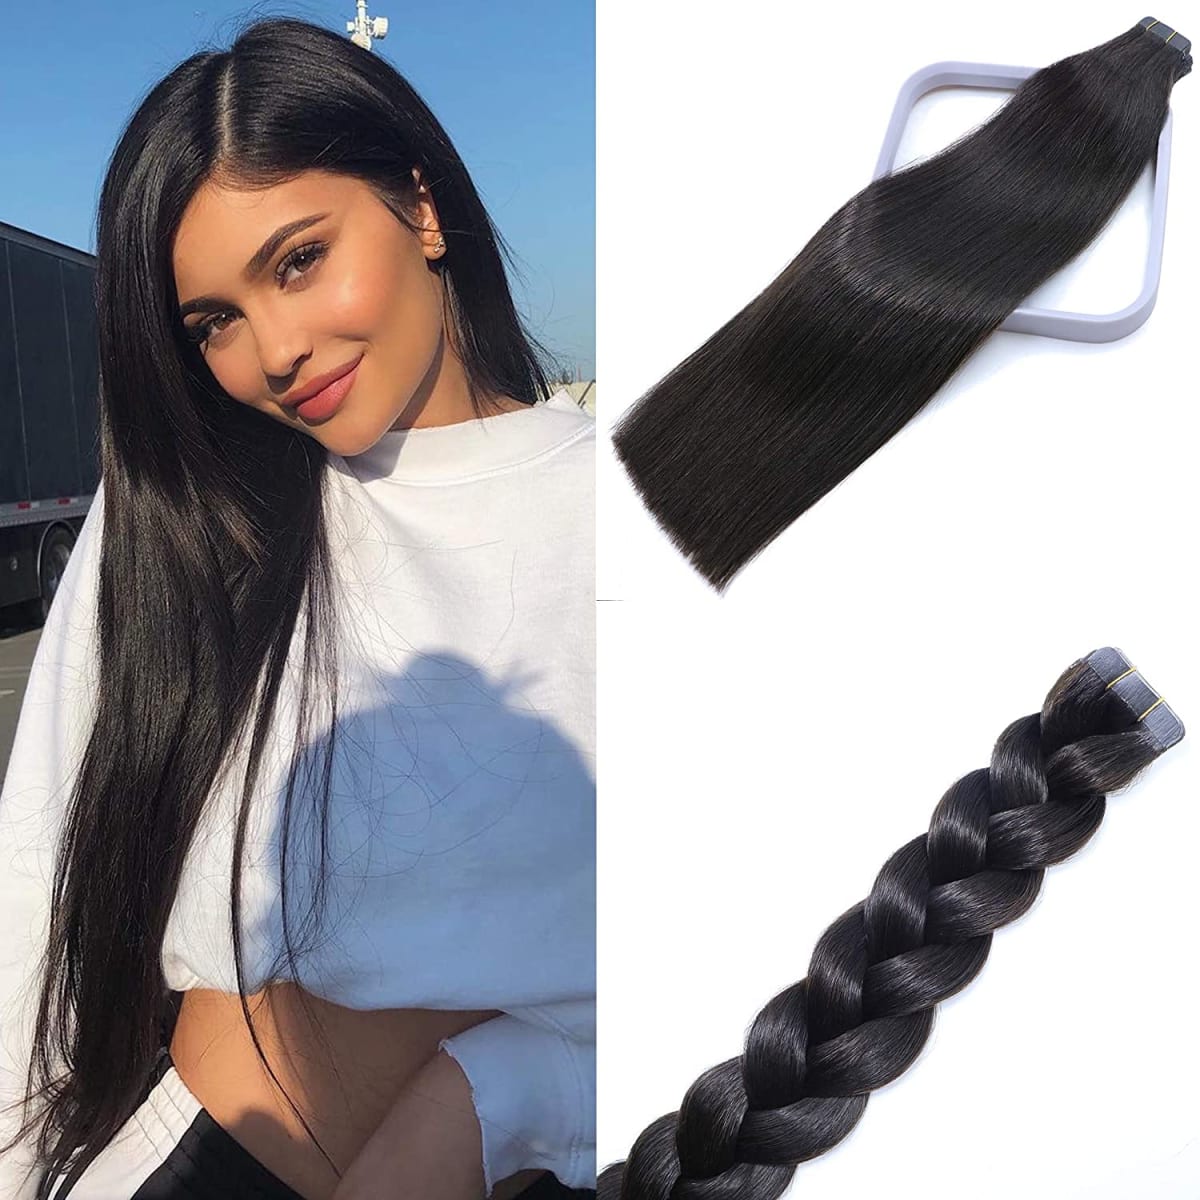 Double Sided Tape Skin Weft Tape in Hair Extensions Natural Off Black Hair Extensions For Black Women 20 Pieces Natrual Remy Hair 22 inch Seamless Silky Full Head 50g